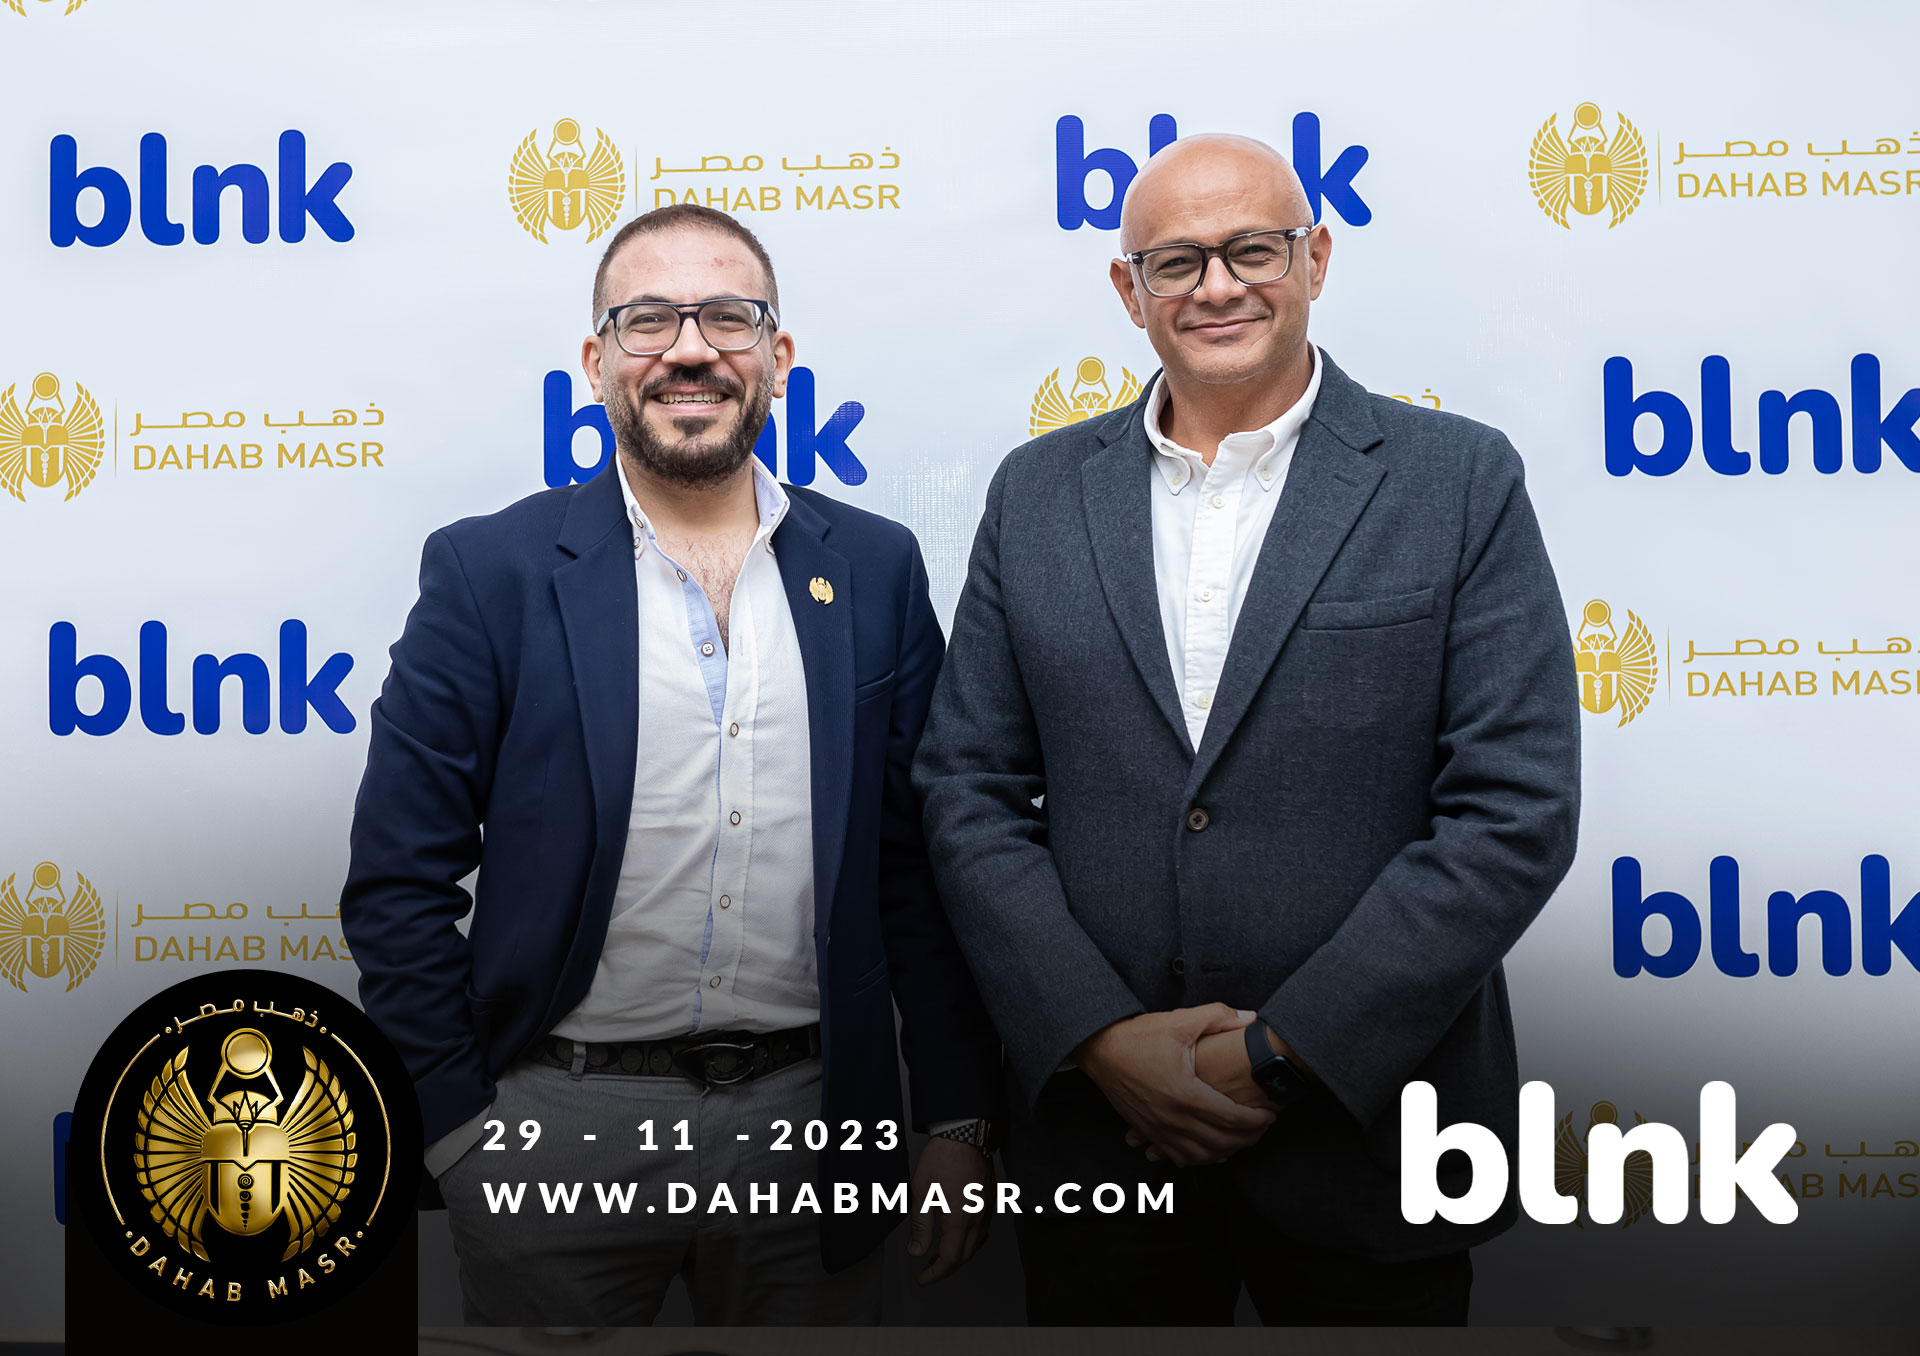 'Dahab Masr' and 'blnk' Shape the Financial Inclusion of the Gold Sector